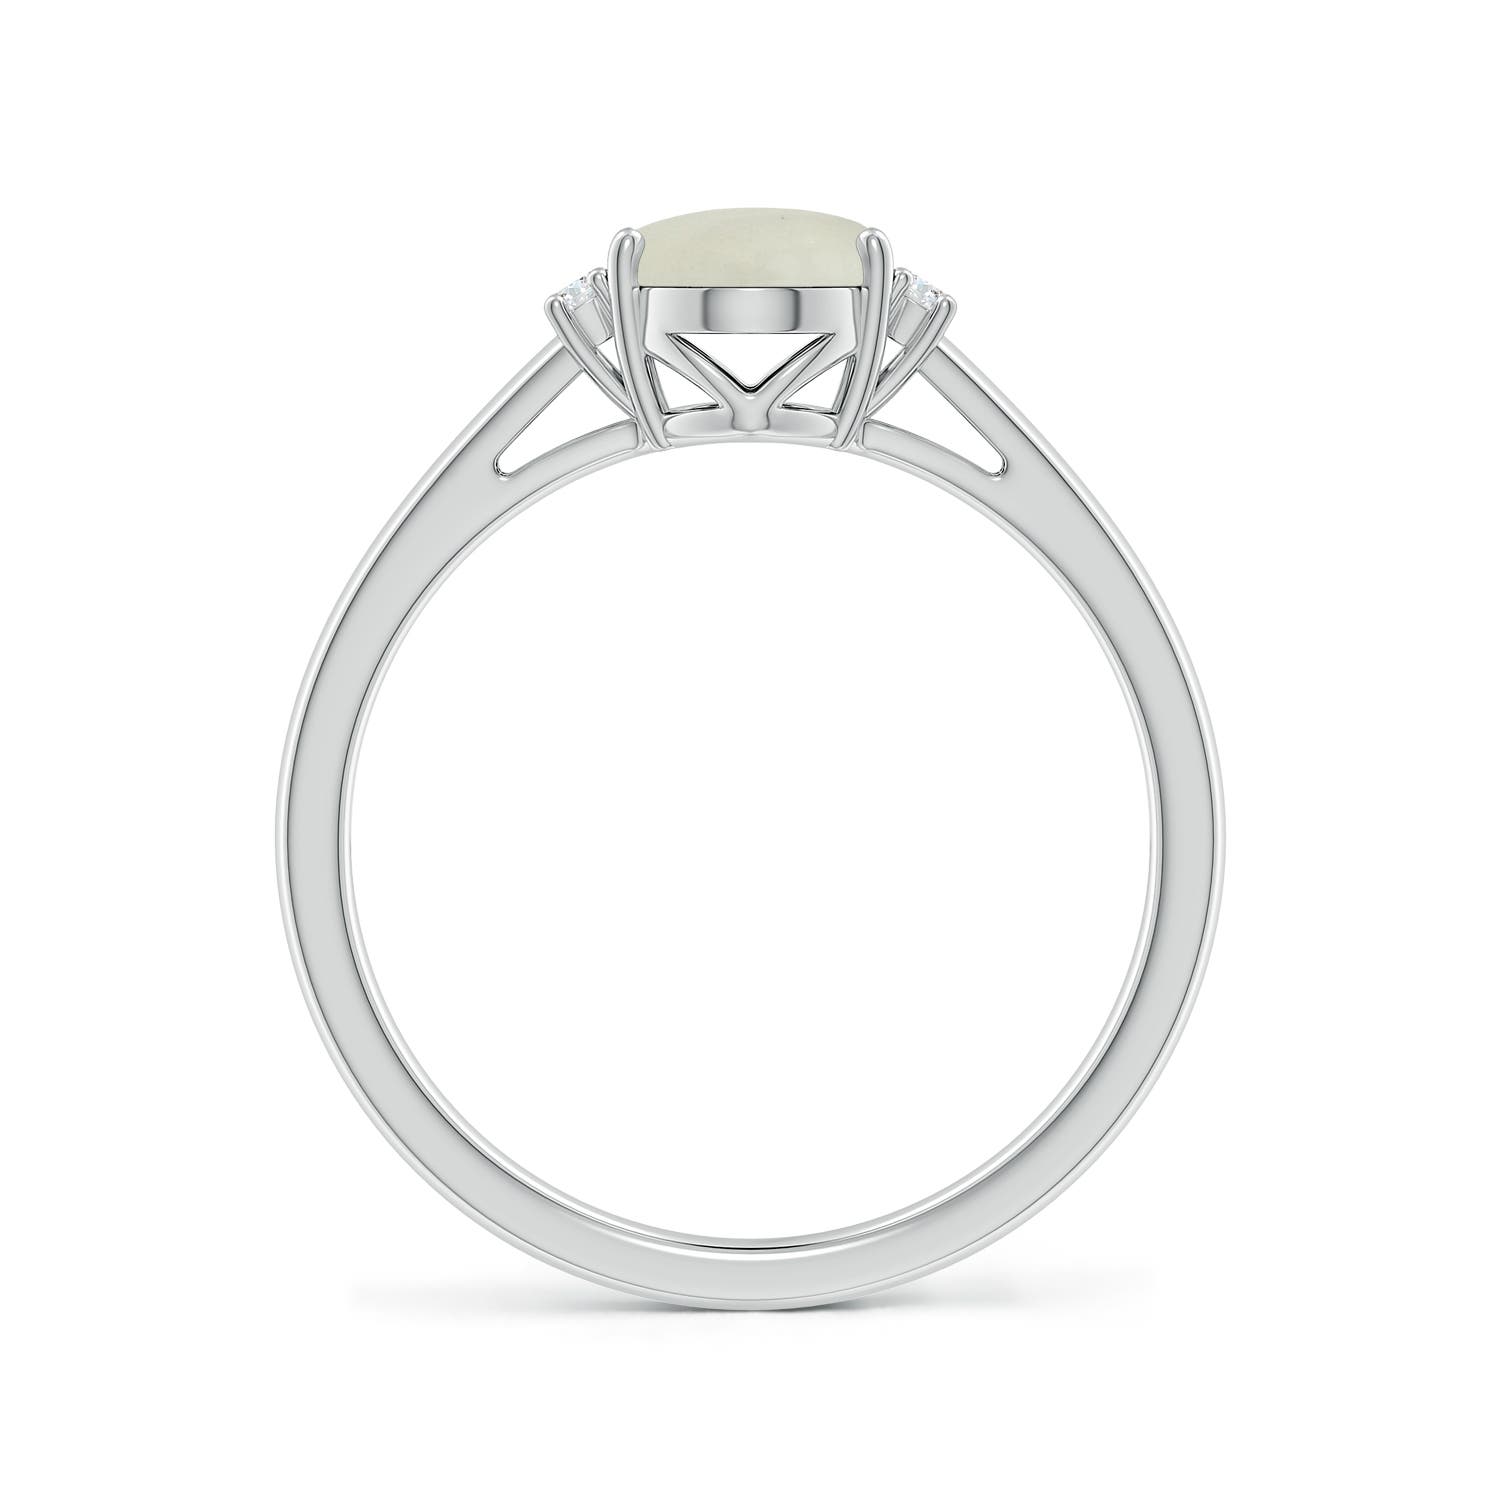 AA - Moonstone / 1.17 CT / 14 KT White Gold